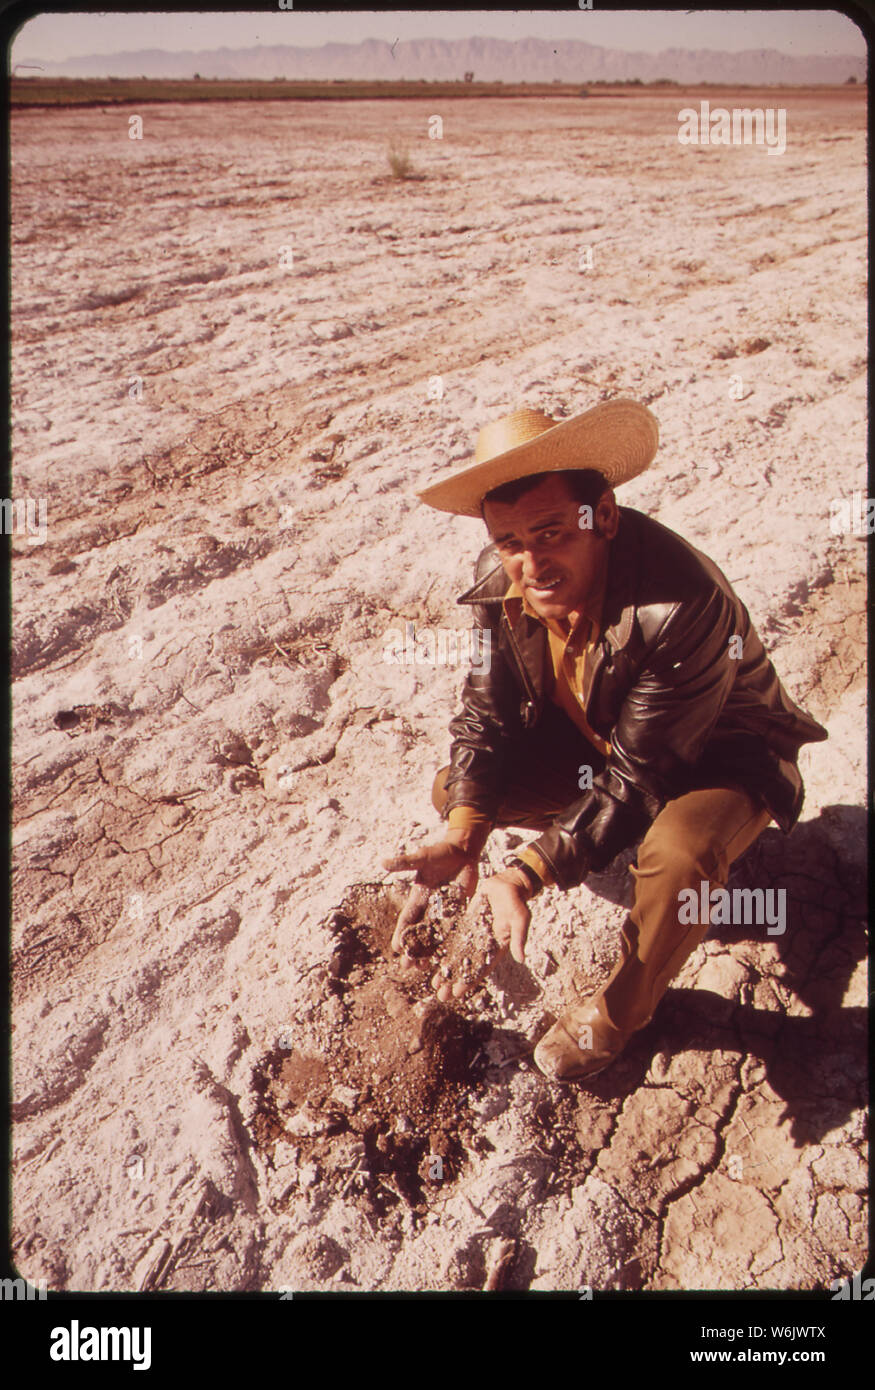 POOR SOIL, DAMAGED BY ACCUMULATED SALT, IS EXAMINED BY MEXICAN FARMER, GILBERTO BUITIERREZ BANAGA, NEAR MEXICALI, MEXICO MEXICANS WANT BETTER QUALITY WATER FROM COLORADO RIVER PRESENTLY SALT CONTENT IS EXTREMELY HIGH AT MEXICAN BORDER Stock Photo